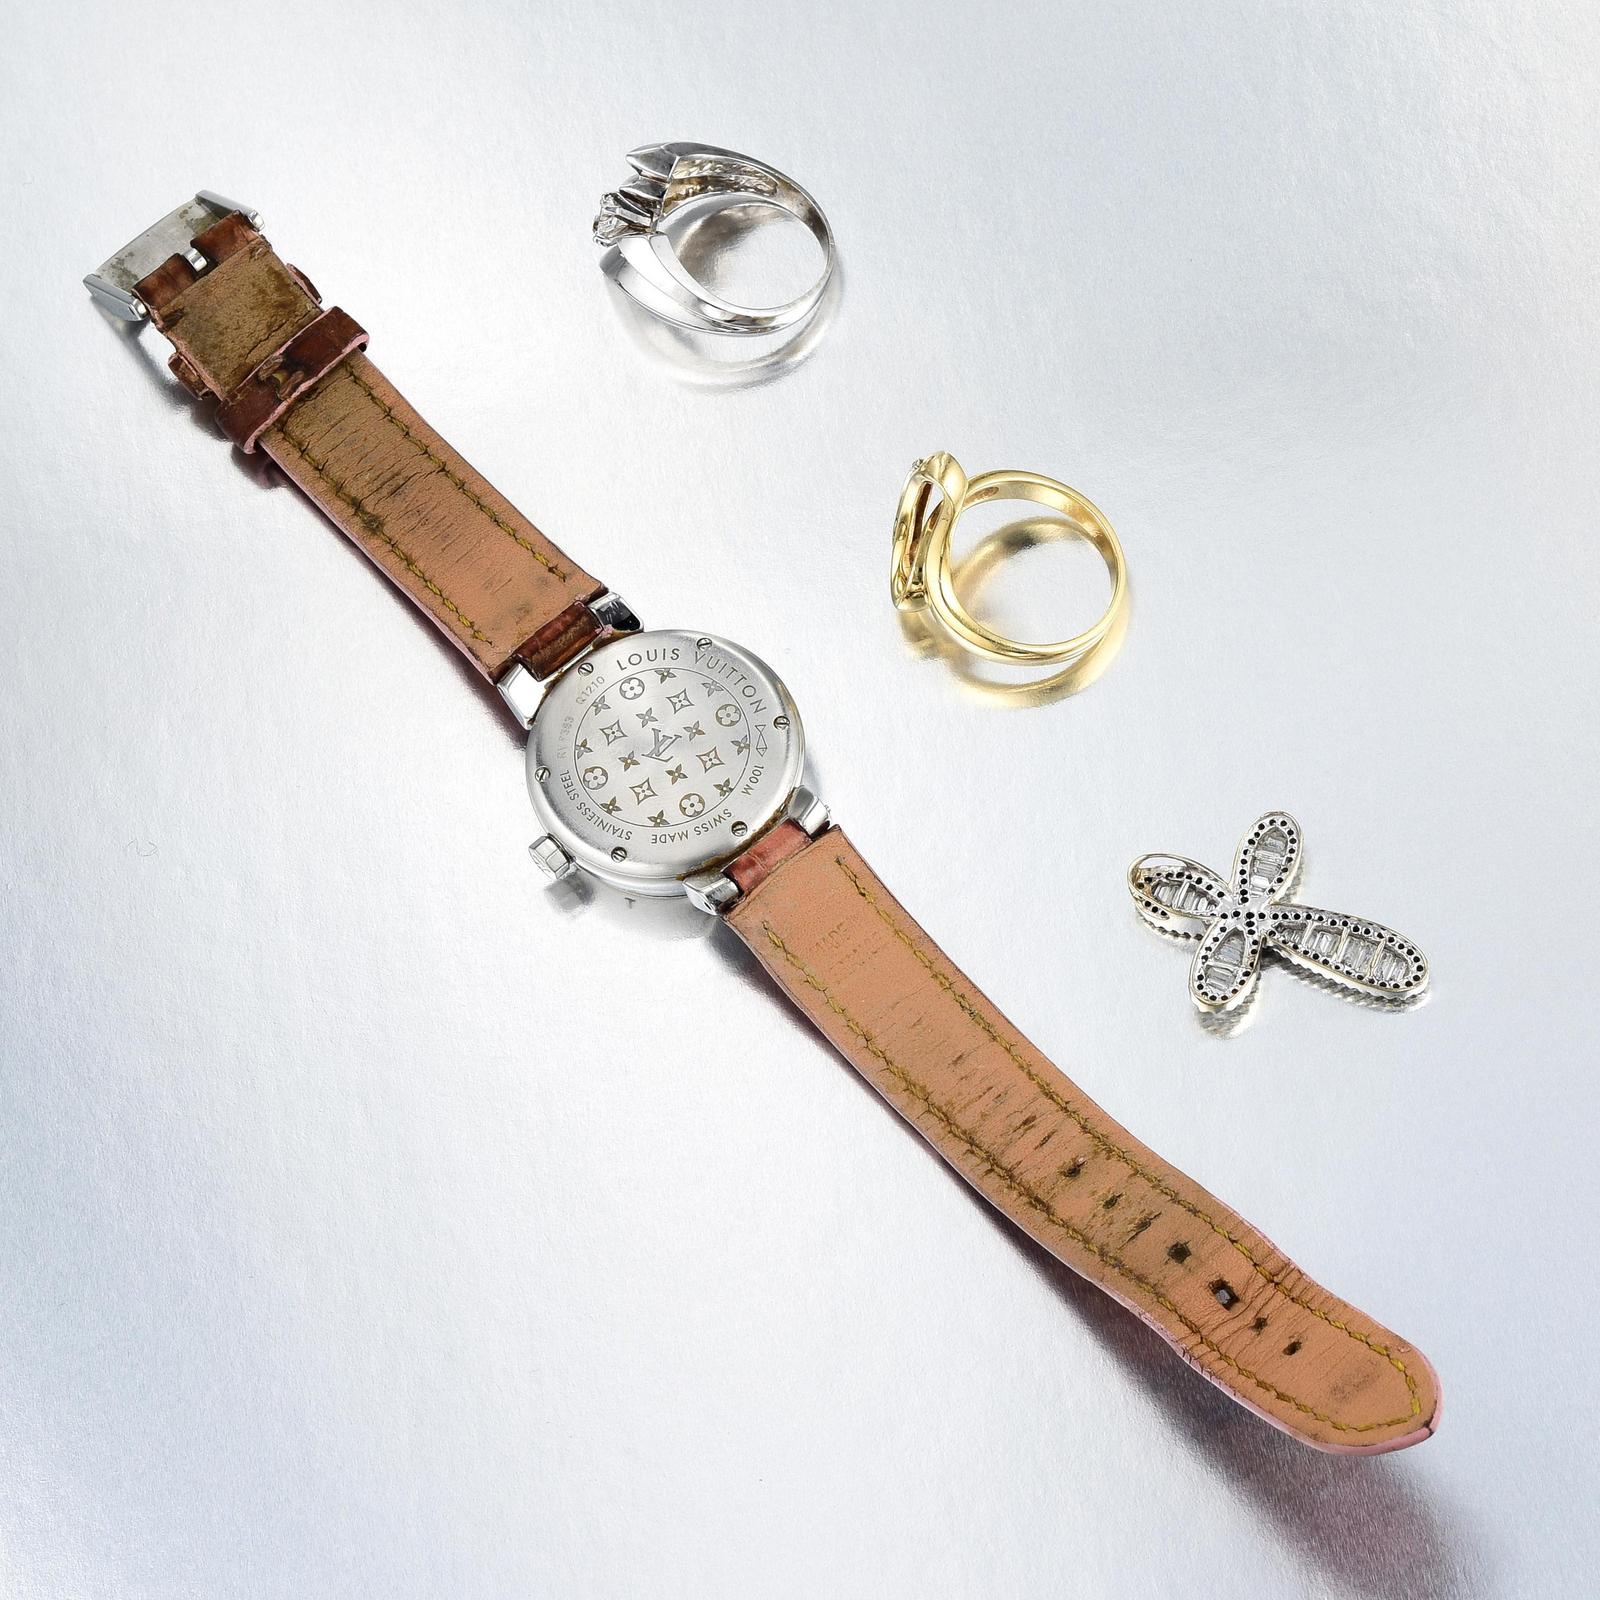 Louis Vuitton Stainless Steel Ladies Watch and a Group of Gold Jewelry